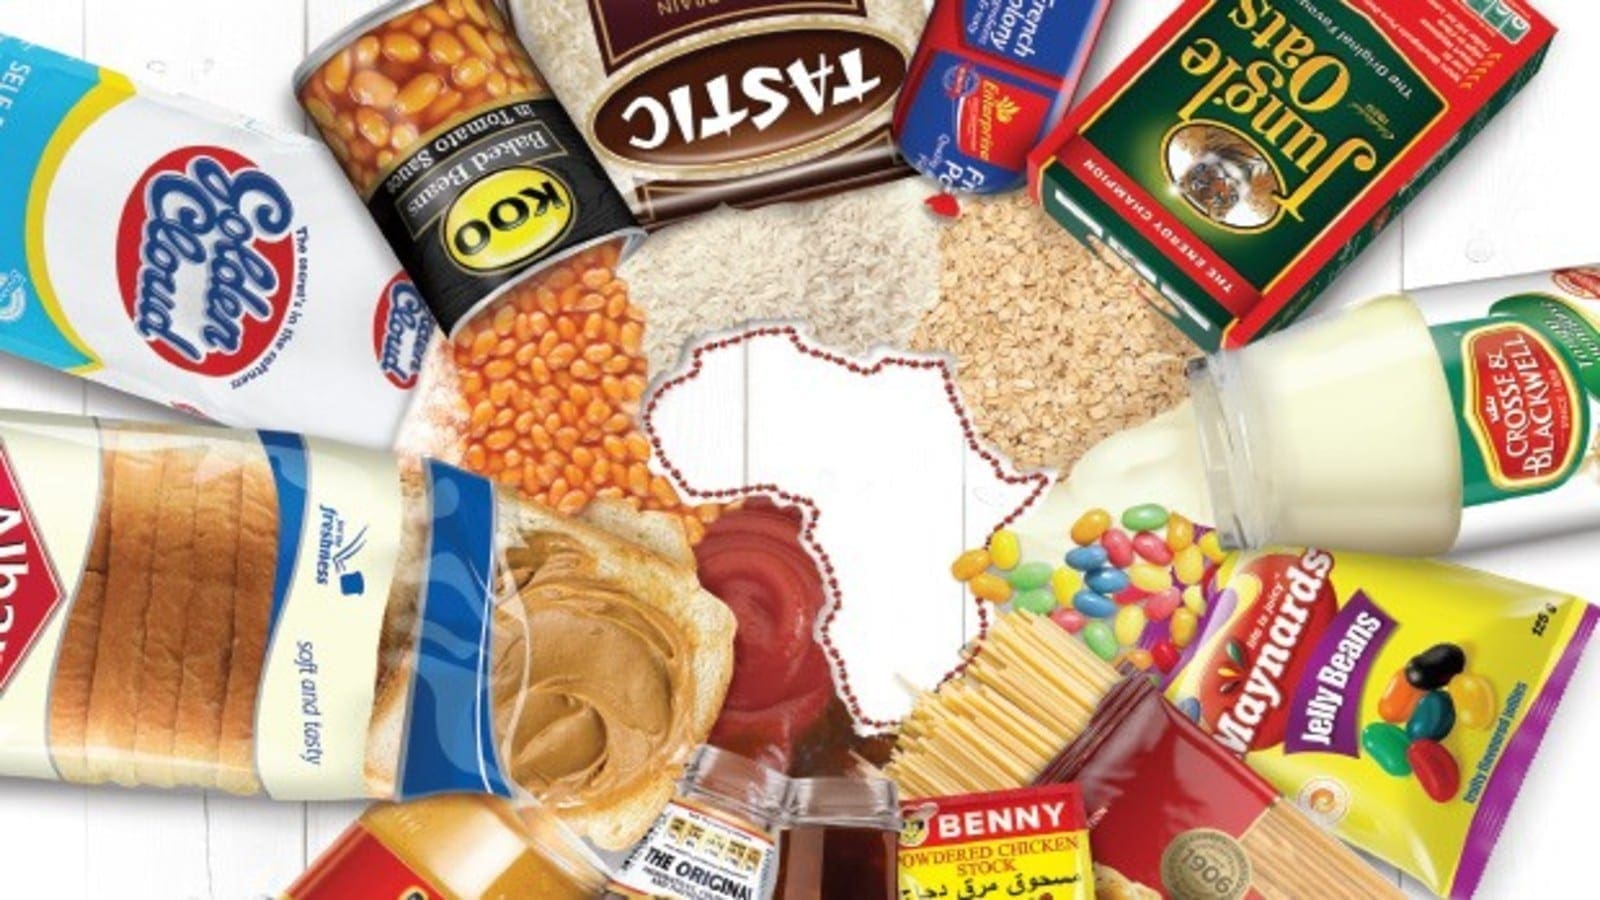 South African food manufacturers Tiger Brands, Unilever suspend advertising amid unrest